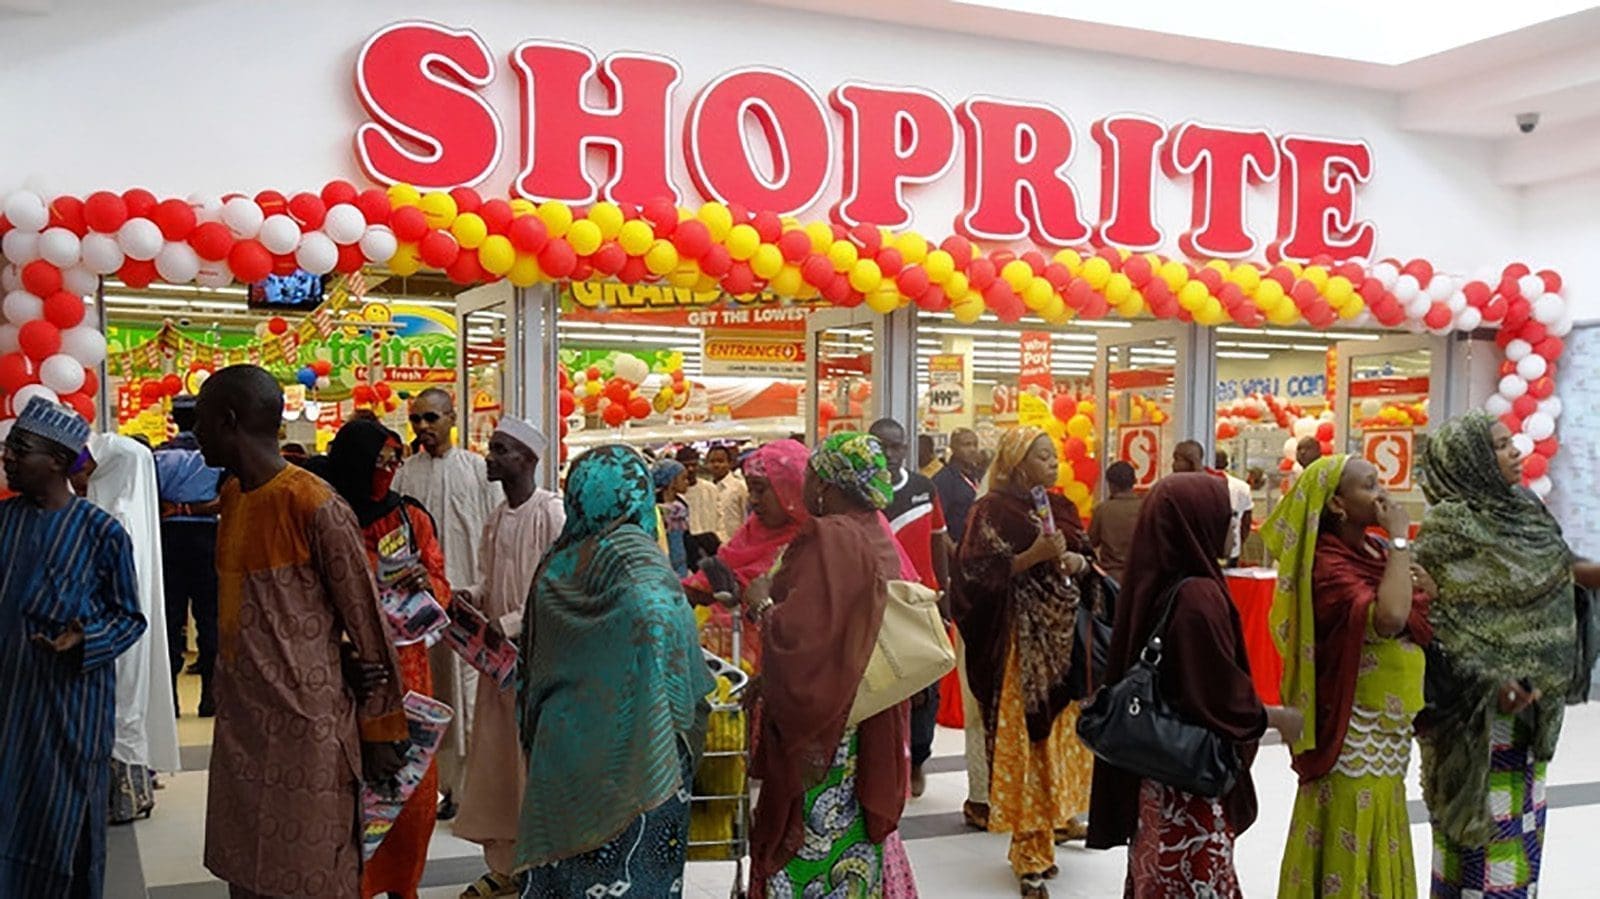 Shoprite Nigeria plans to open new outlets eyeing future growth